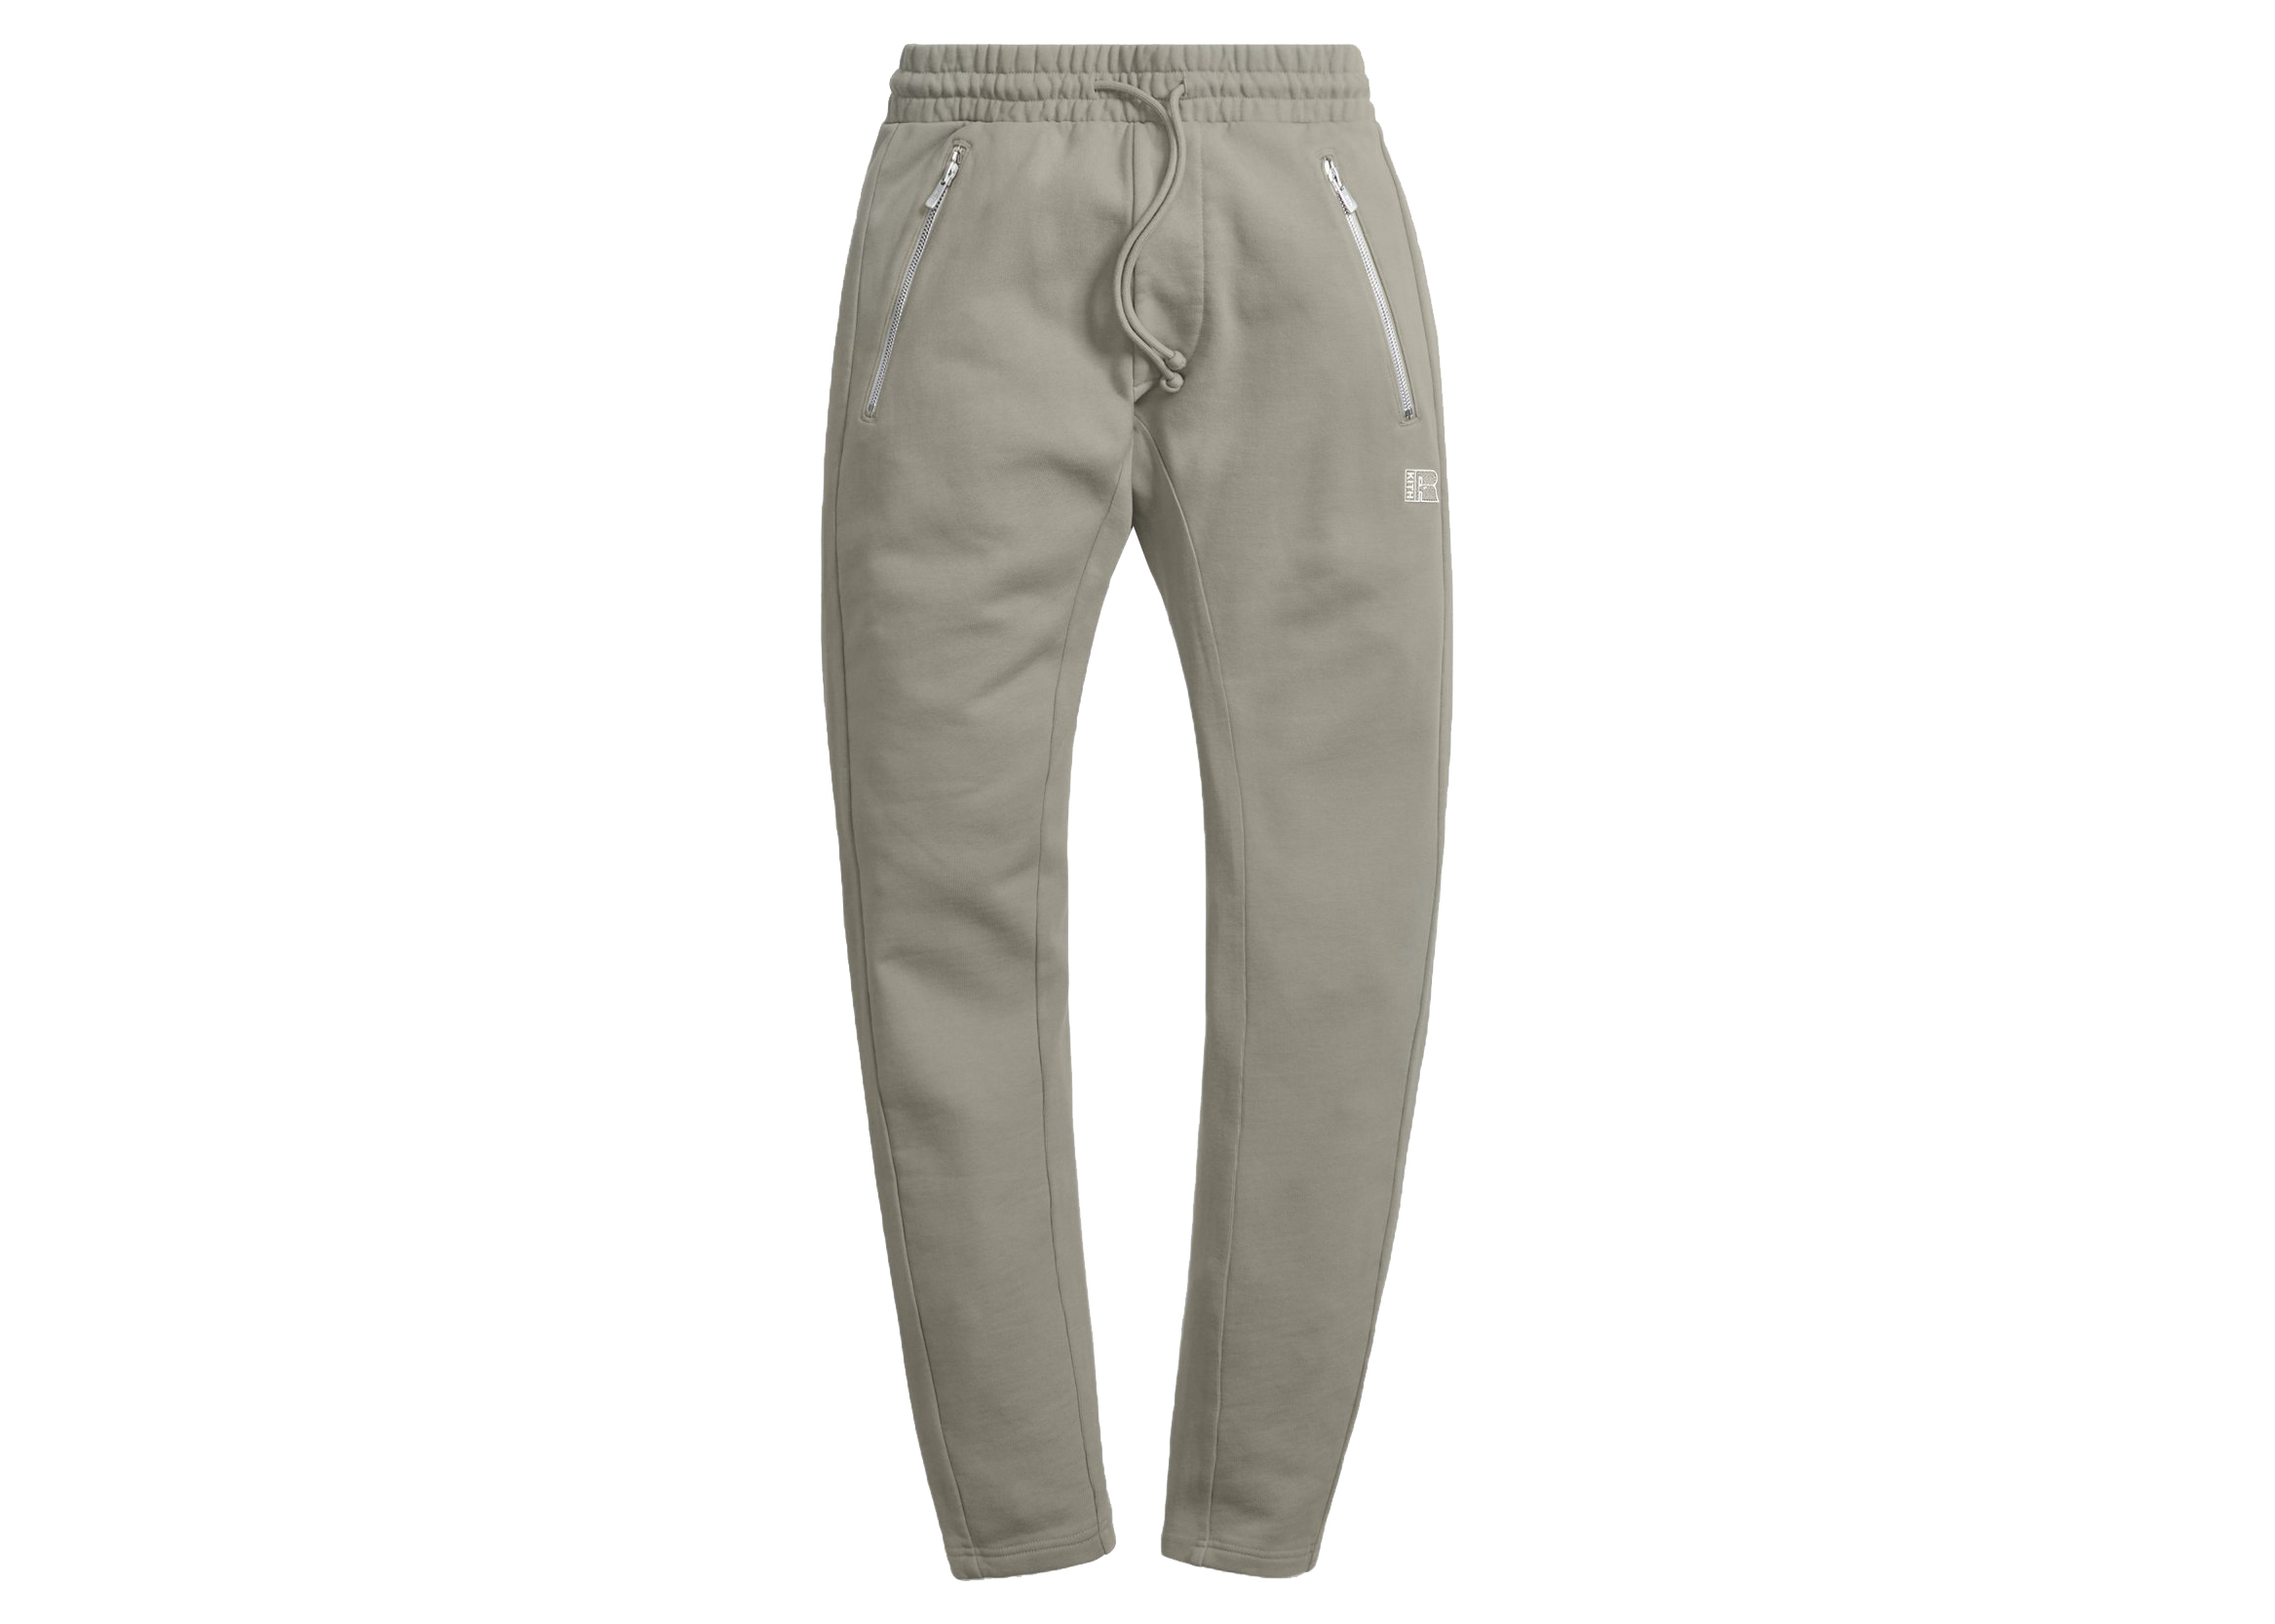 Kith for Russell Athletic Bleecker Sweatpant Astro - FW21 Men's - US